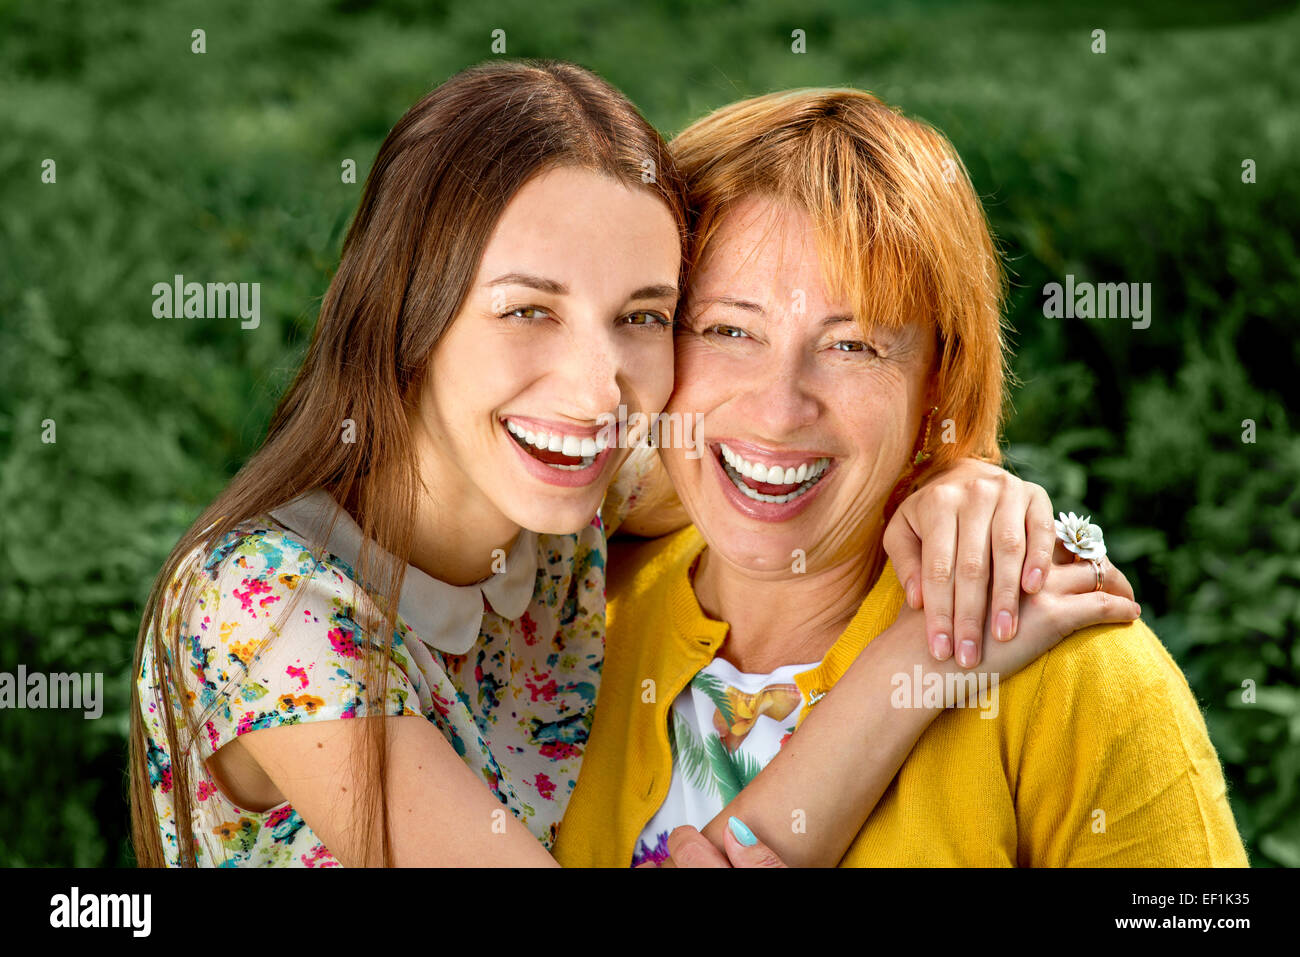 Mother with her daughter smiling and hugging dressed in yellow in the park Stock Photo